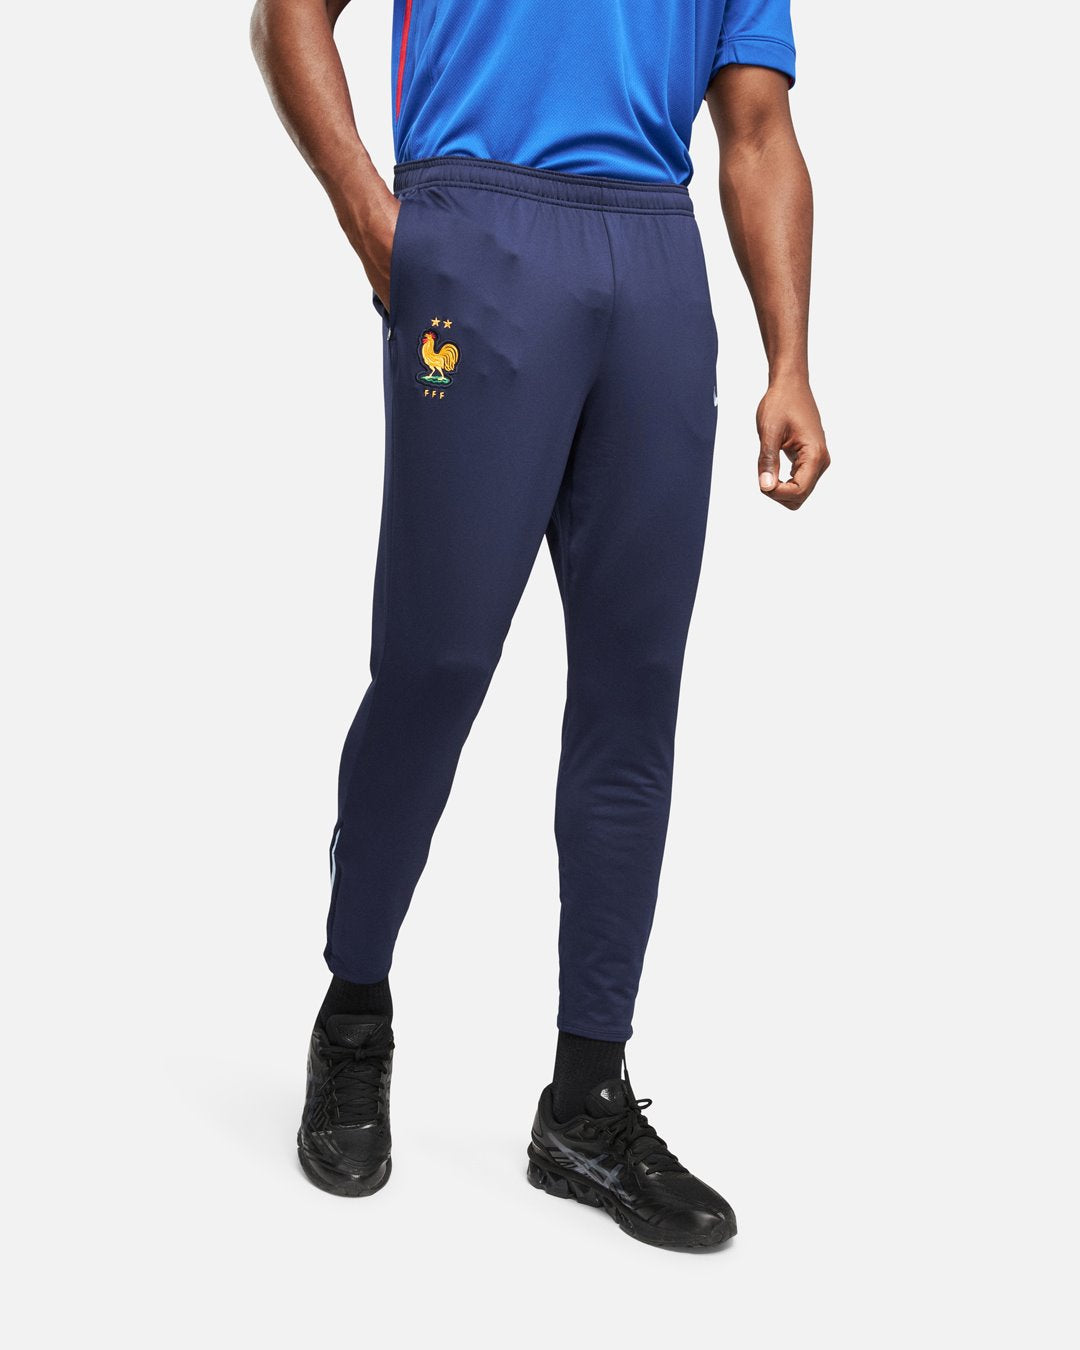 2024 French Team training pants - Blue